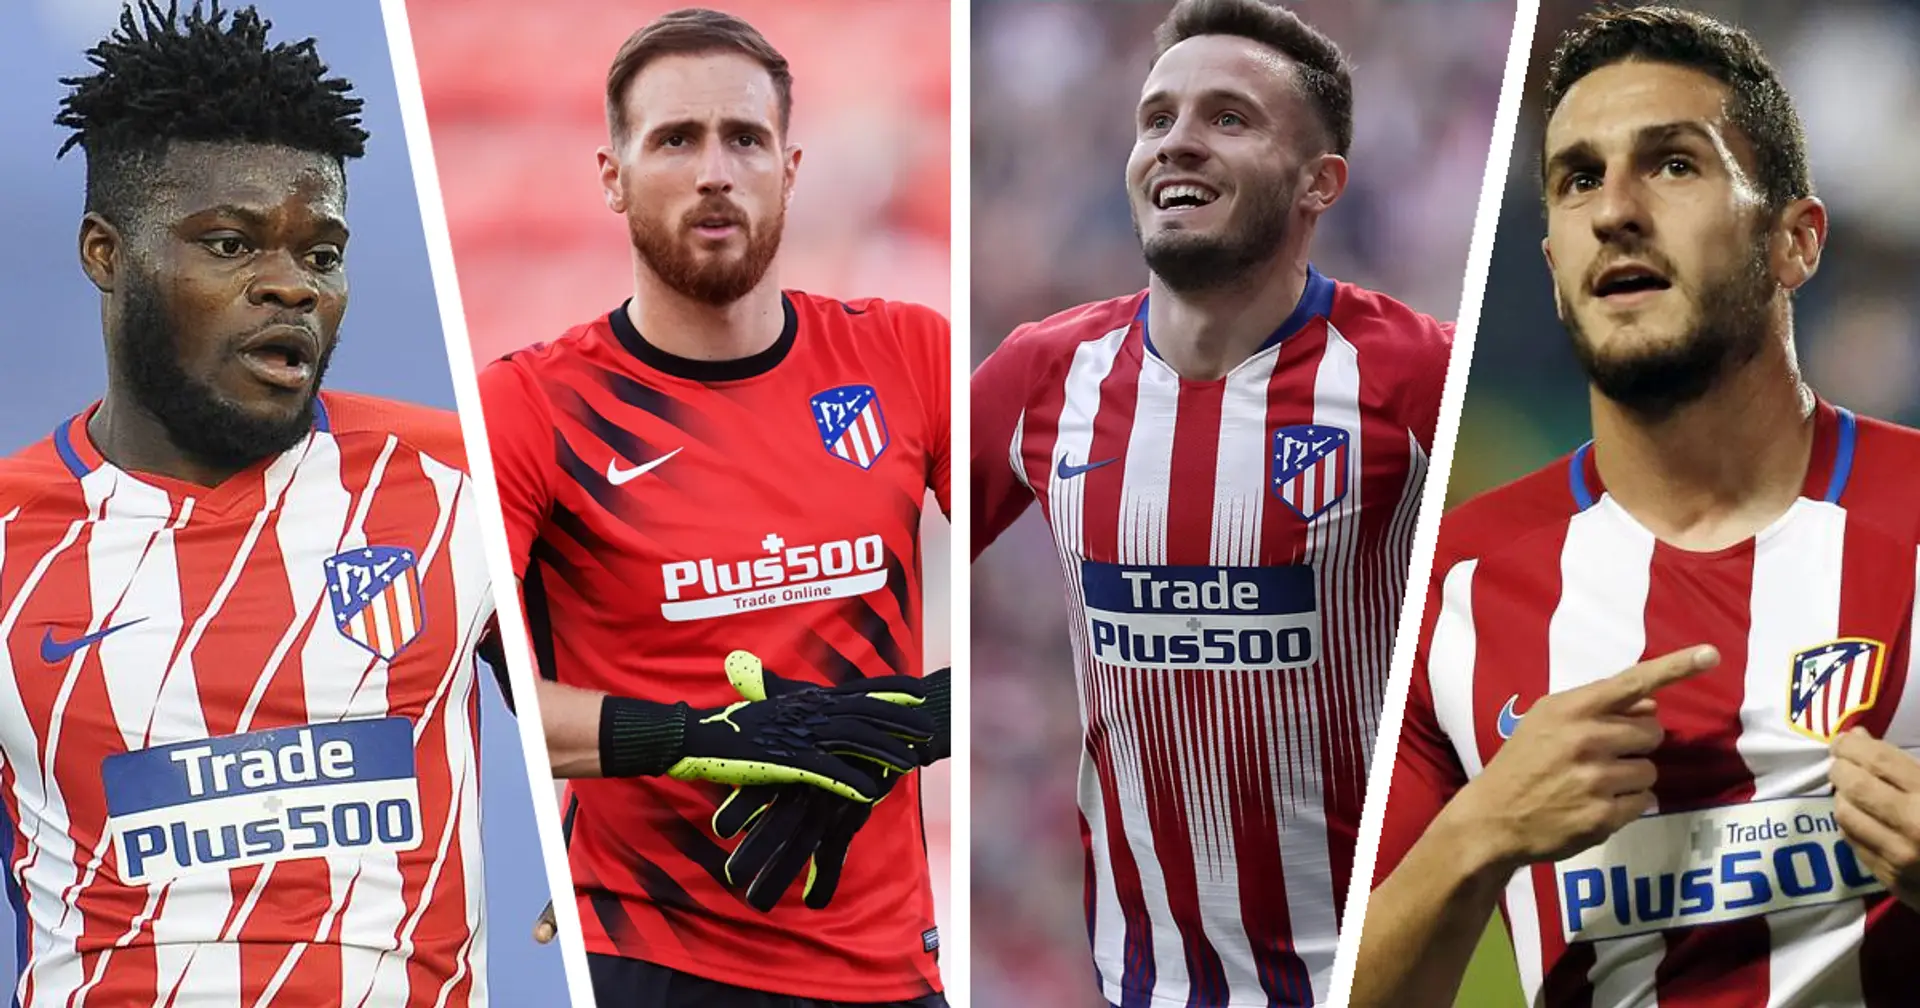 If you could sign one Atletico Madrid player, who would it be?